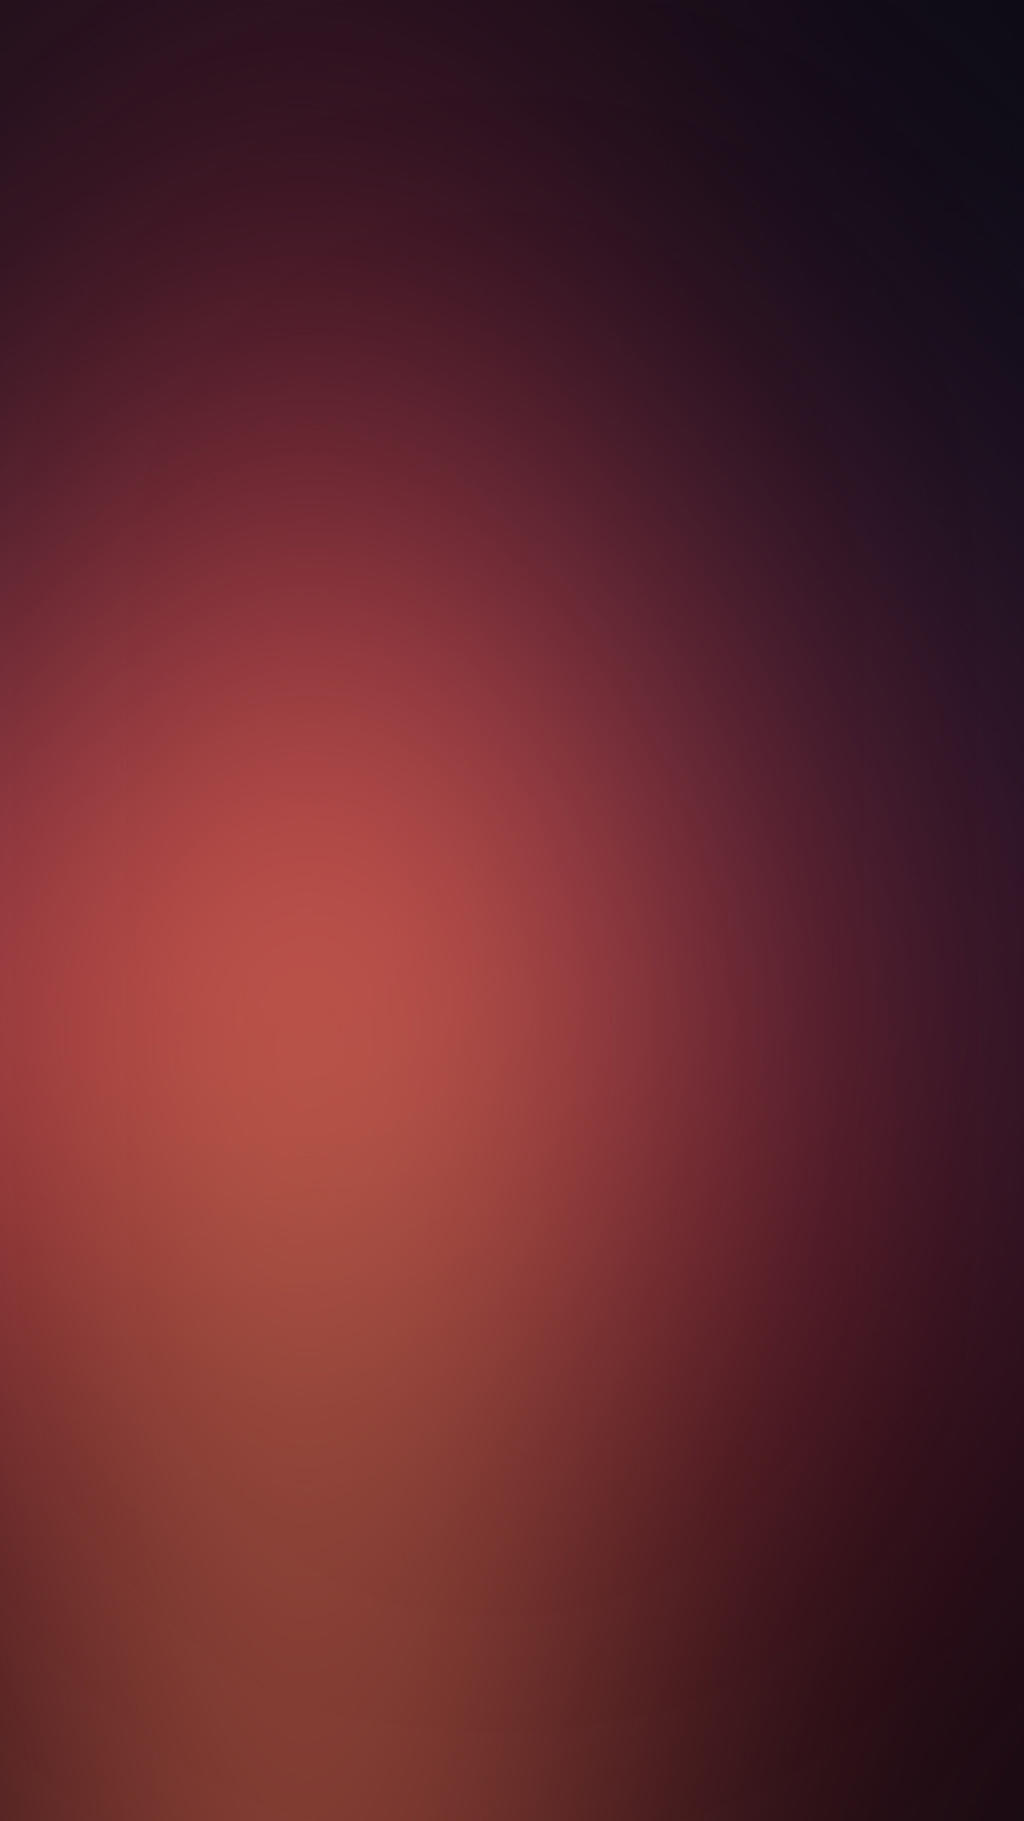 Blurry Abstract Background Mobile HD Wallpaper15 by vactual on DeviantArt